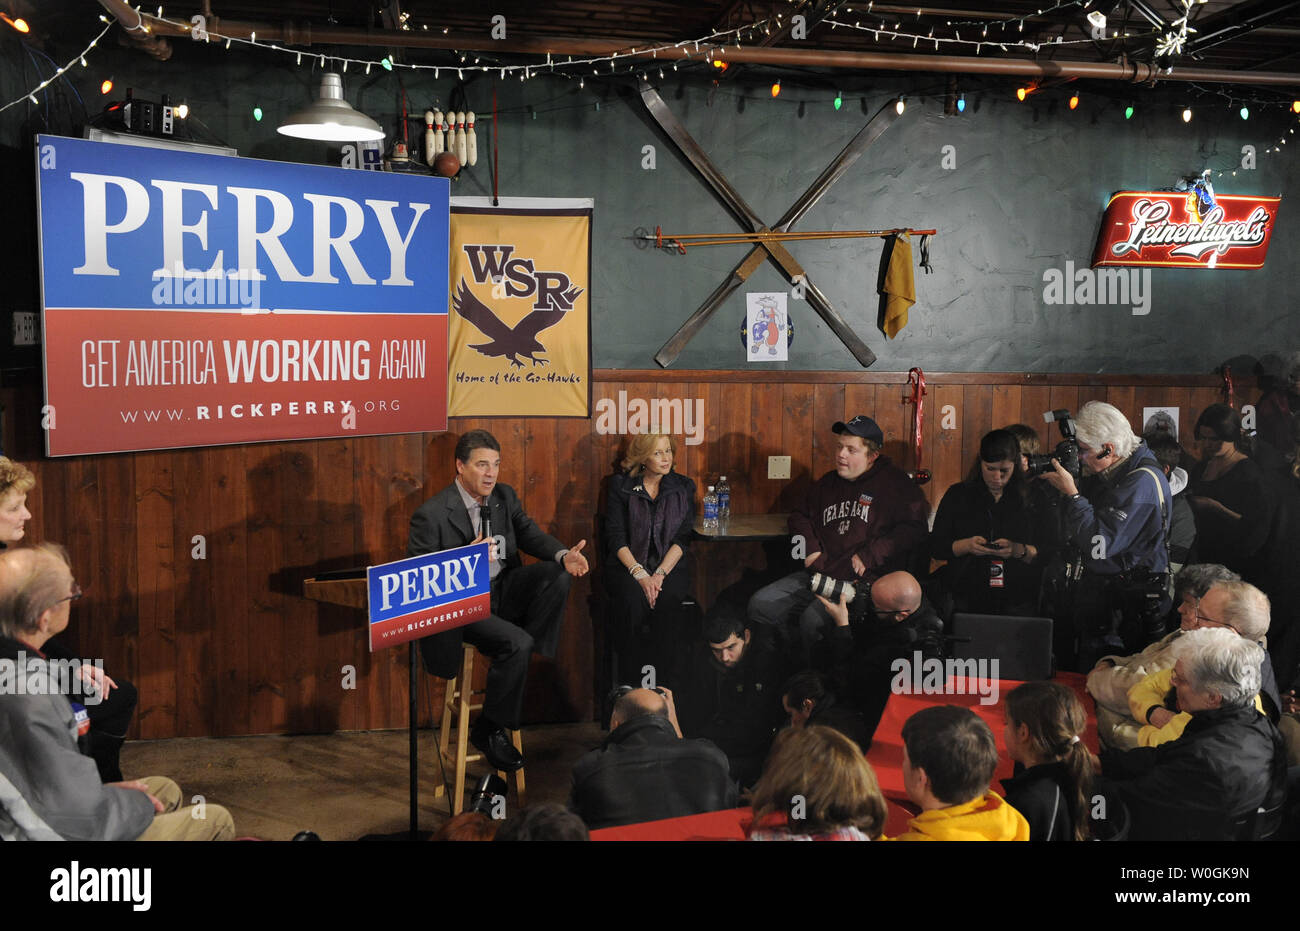 Republican 2012 presidential candidate and Texas Gov. Rick Perry responds to a question as his wife Anita (C) listens along with supporters during a campaign stop at The Fainting Goat Bar and Grill in Waverly, Iowa, December 30, 2011, in advance of Iowa's first-in-the-nation caucuses, January 3,2012.    UPI/Mike Theiler Stock Photo